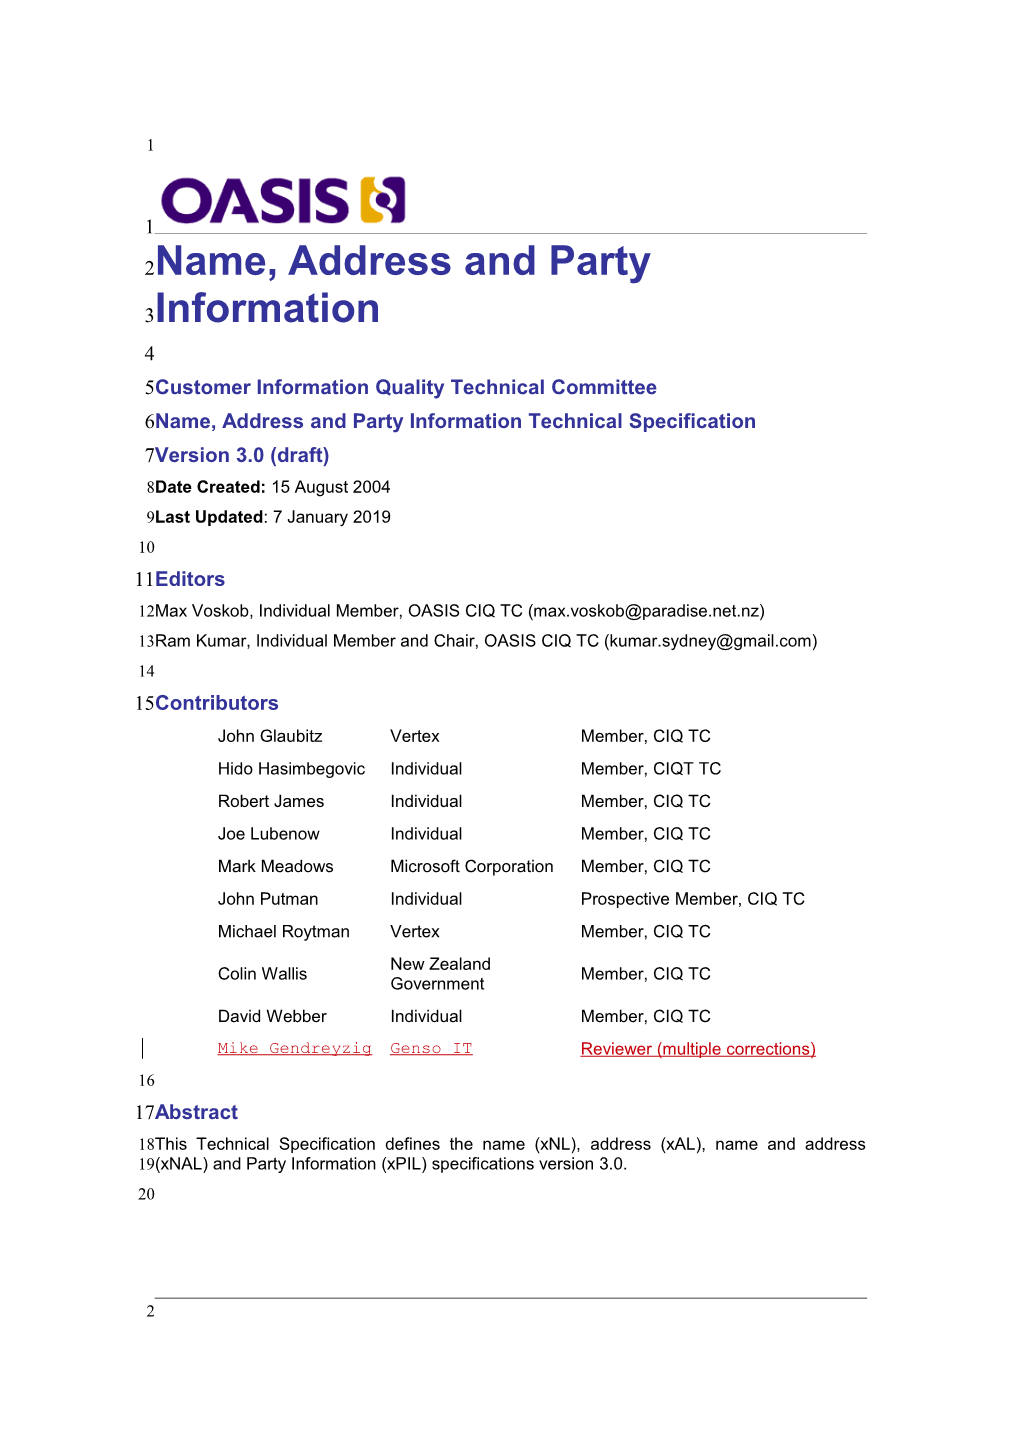 Name, Address and Party Information